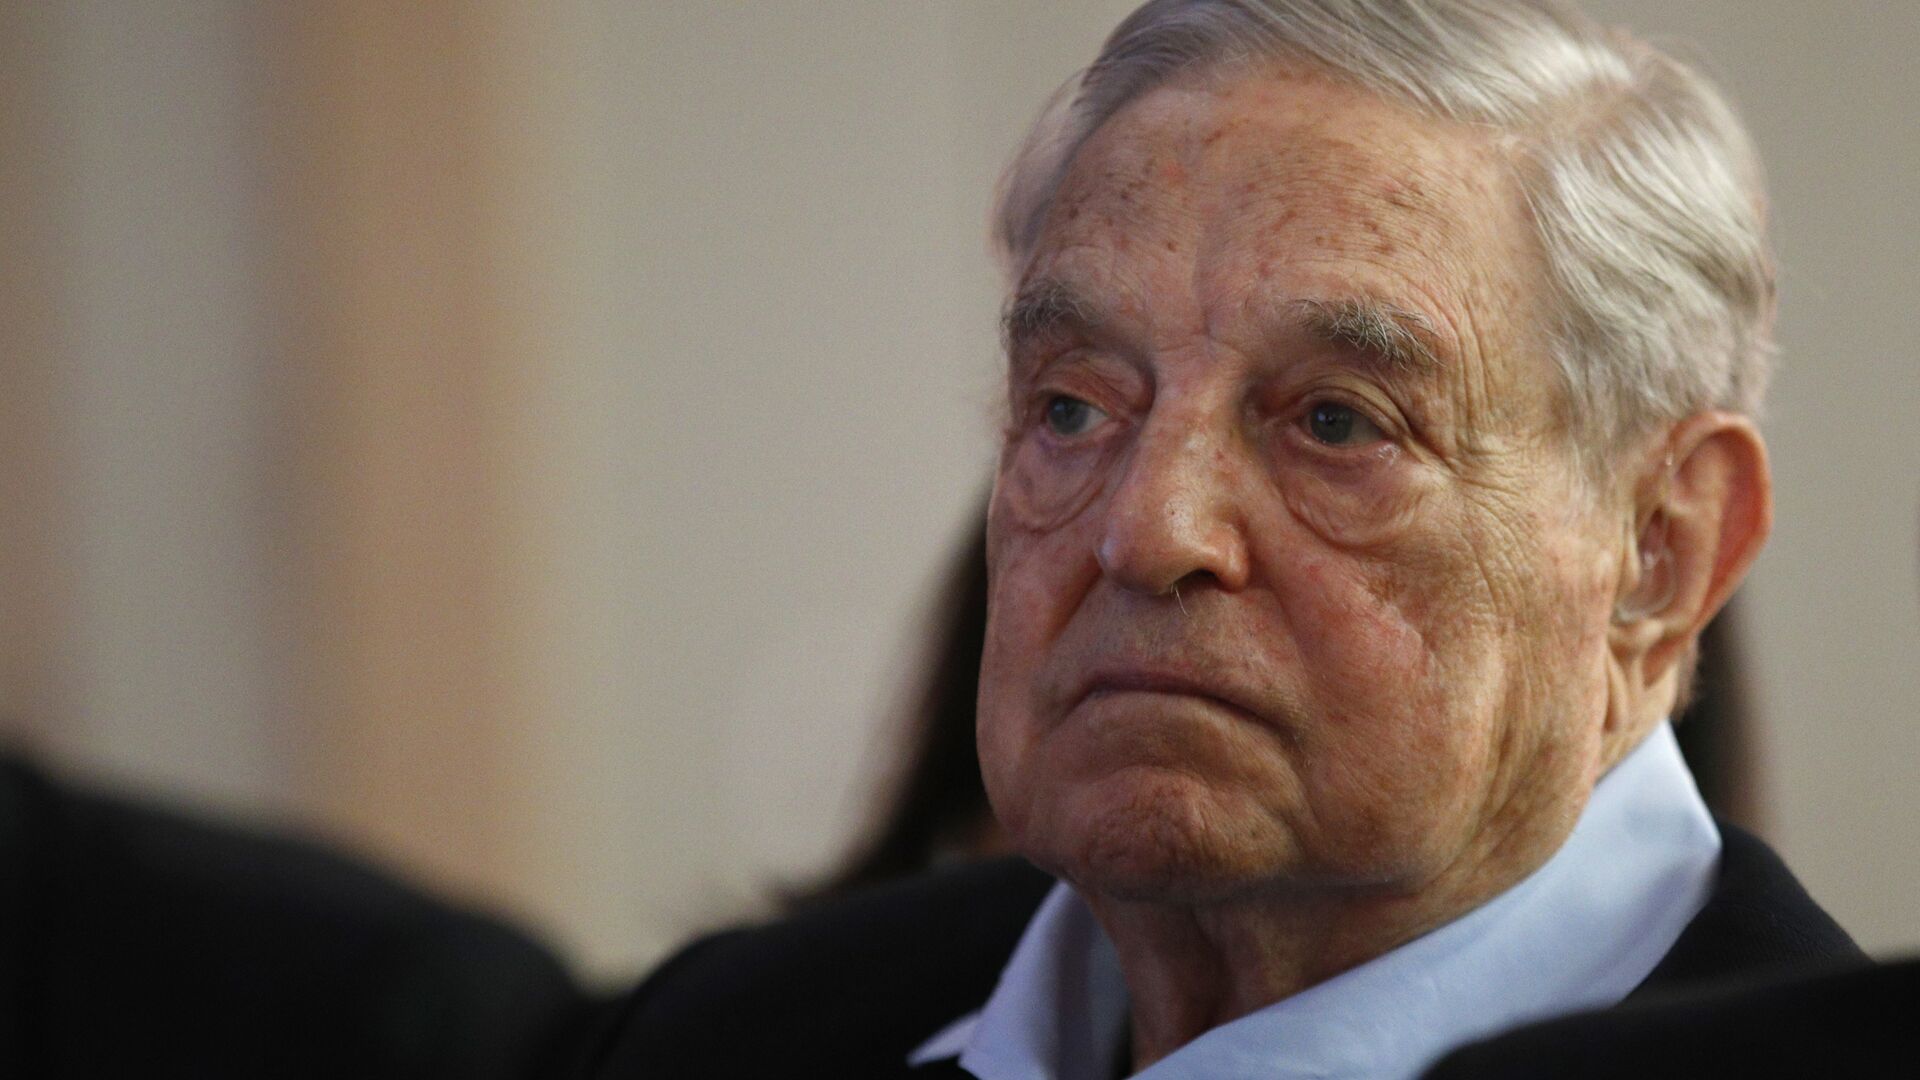 George Soros, Founder and Chairman of the Open Society Foundations listens to the conference after his speech entitled How to save the European Union as he attends the European Council On Foreign Relations Annual Council Meeting in Paris, Tuesday, May 29, 2018 - Sputnik International, 1920, 09.12.2021